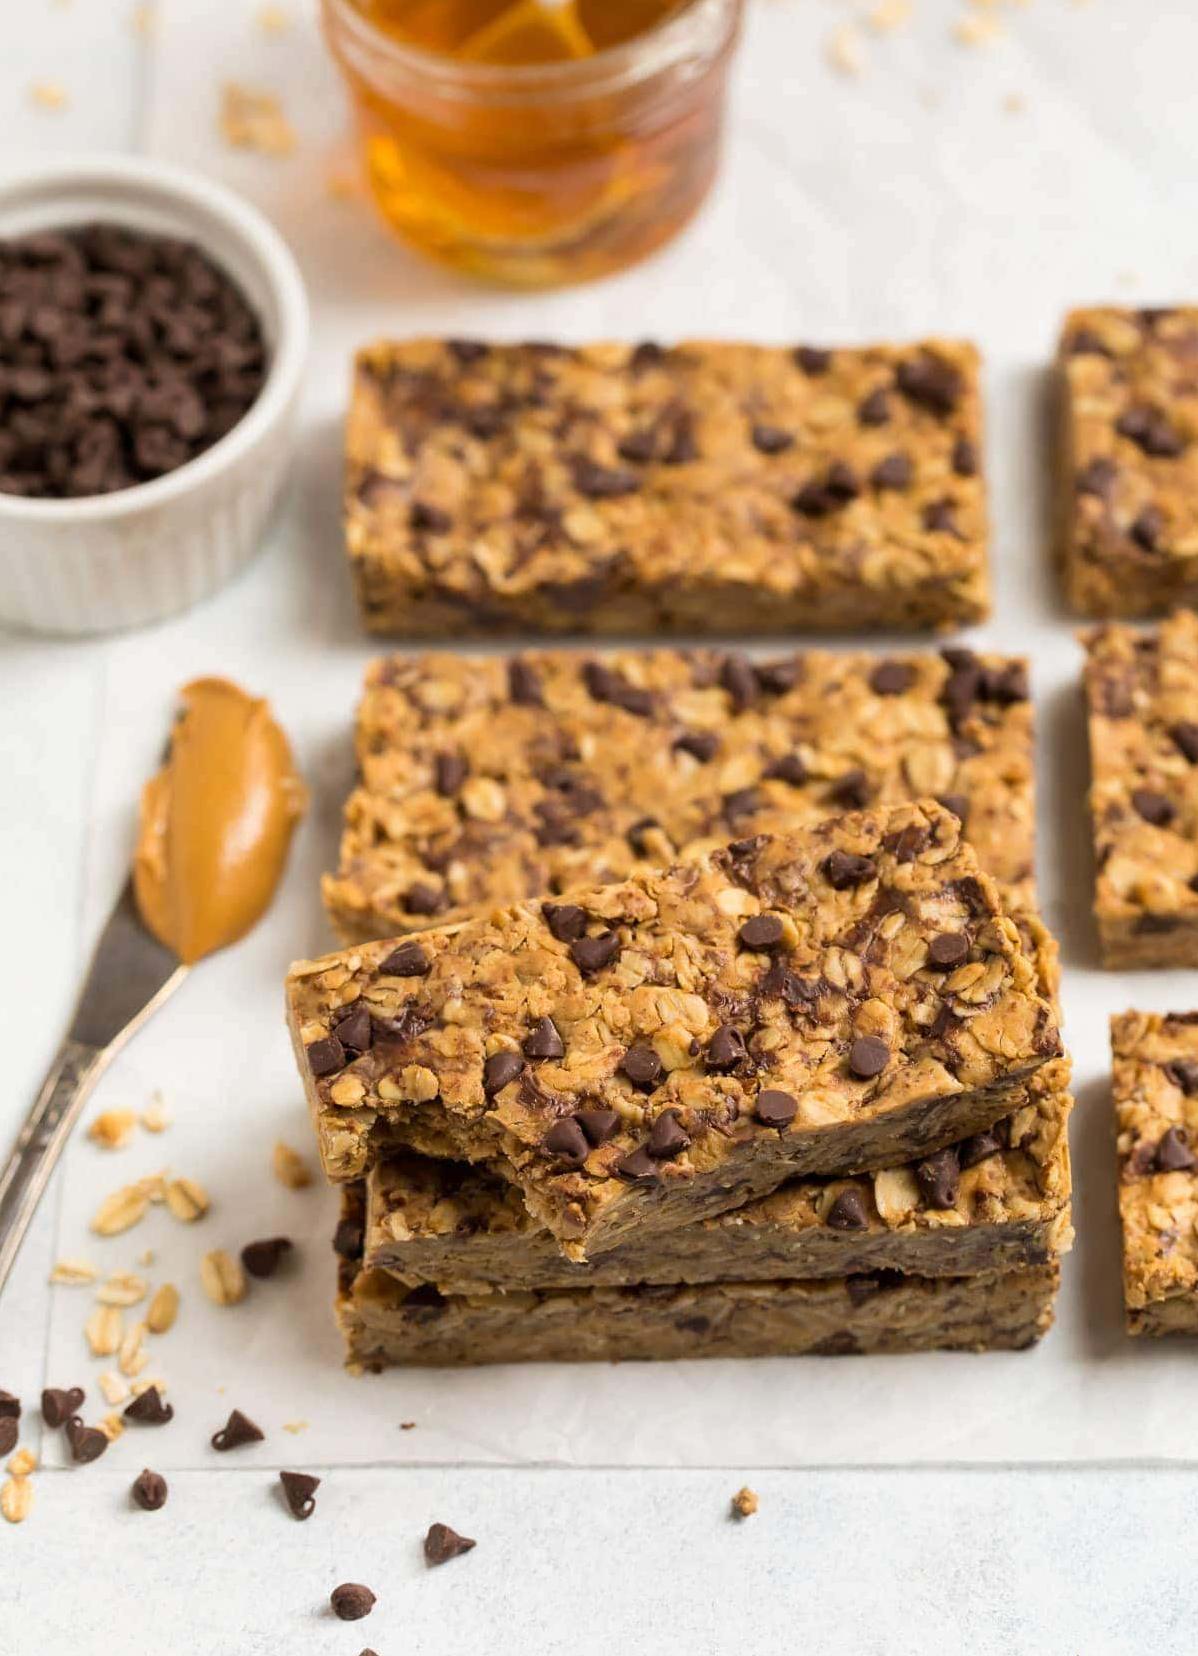  Not only are these bars tasty, but they're also packed with nourishing ingredients.